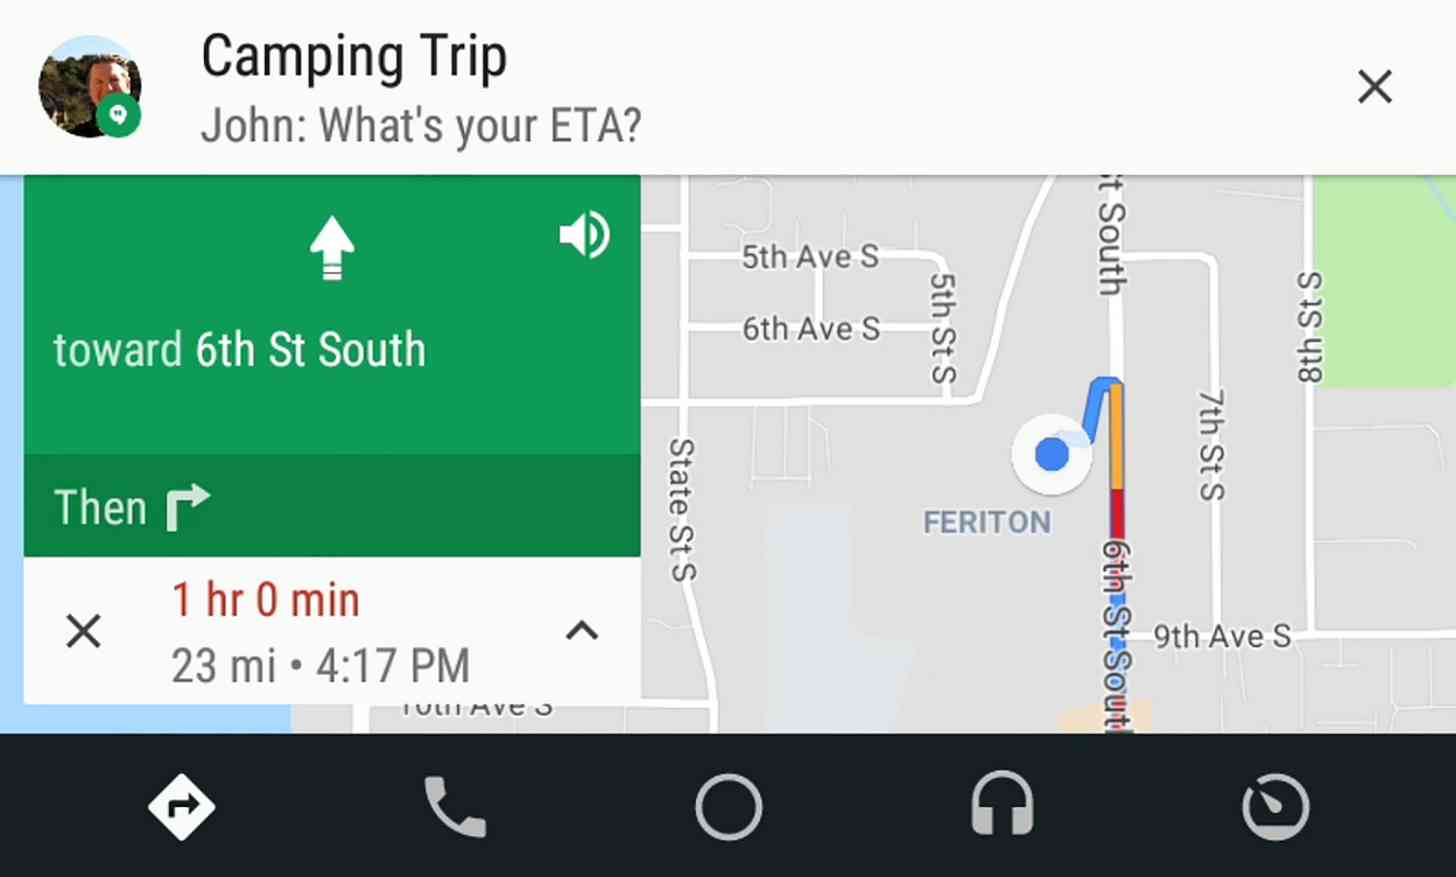 Android Auto messaging improvements